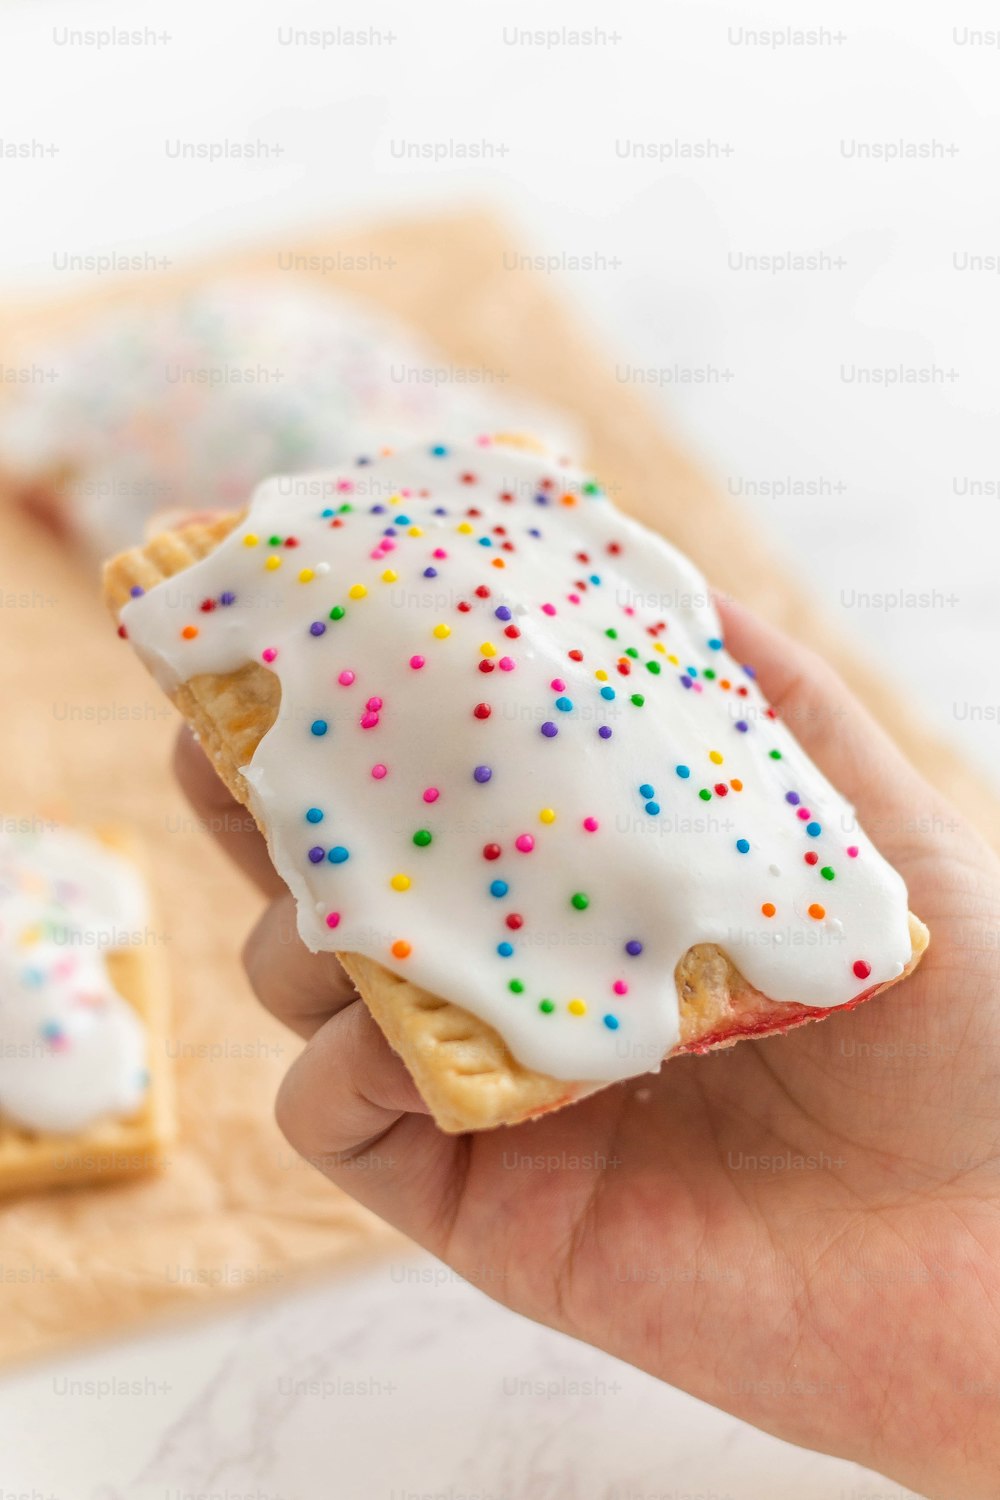 a hand holding a pastry with white frosting and sprinkles